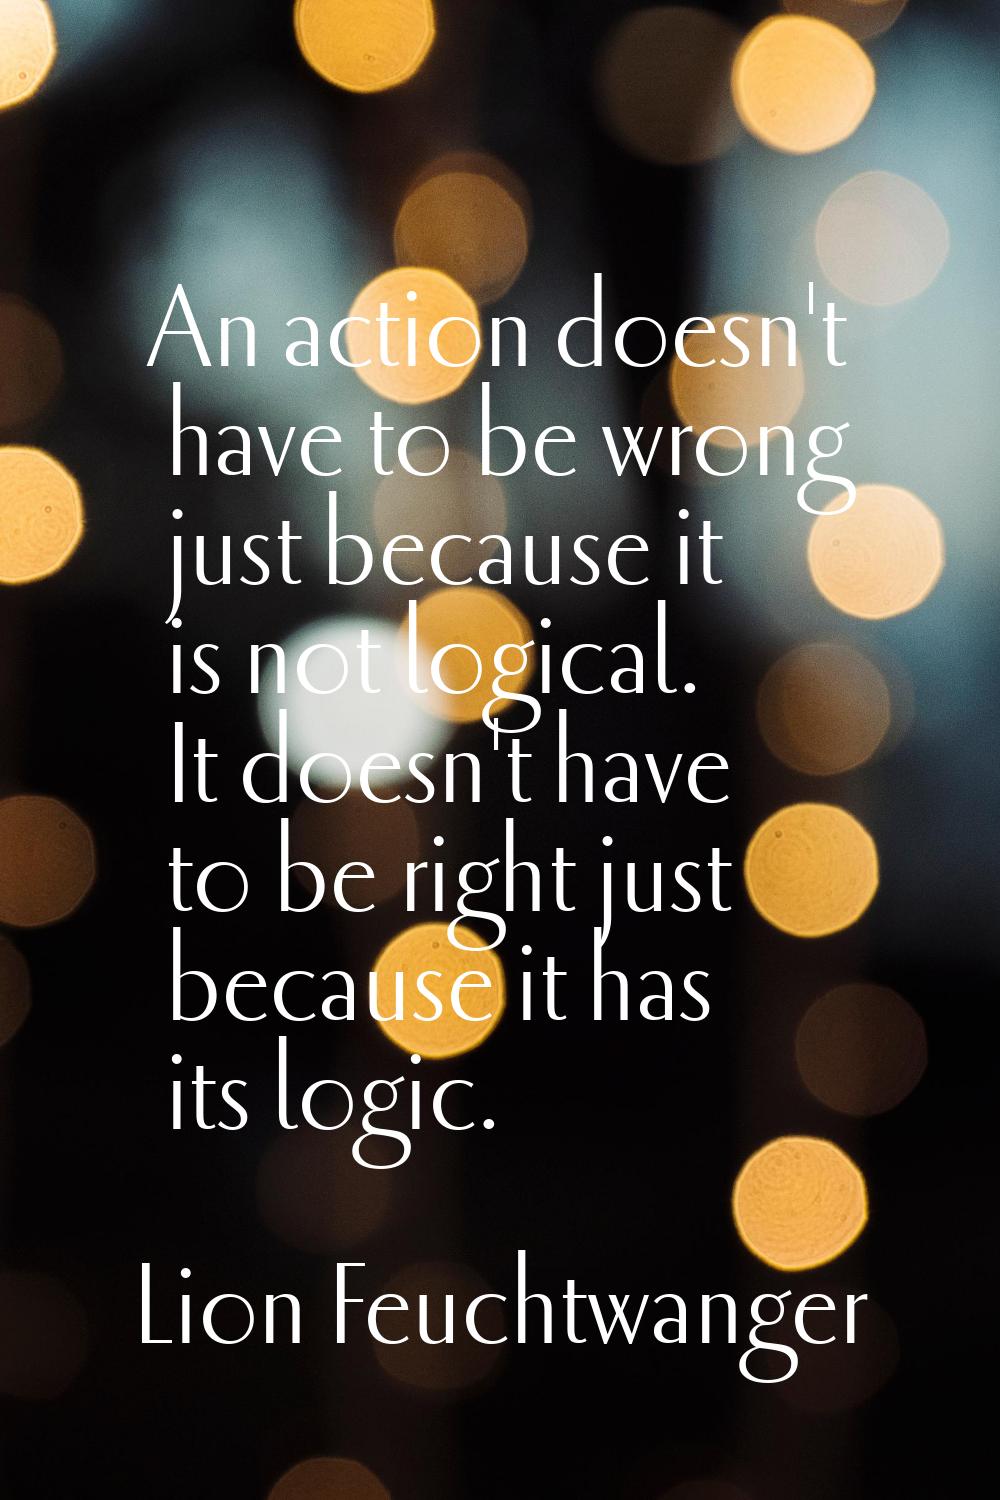 An action doesn't have to be wrong just because it is not logical. It doesn't have to be right just